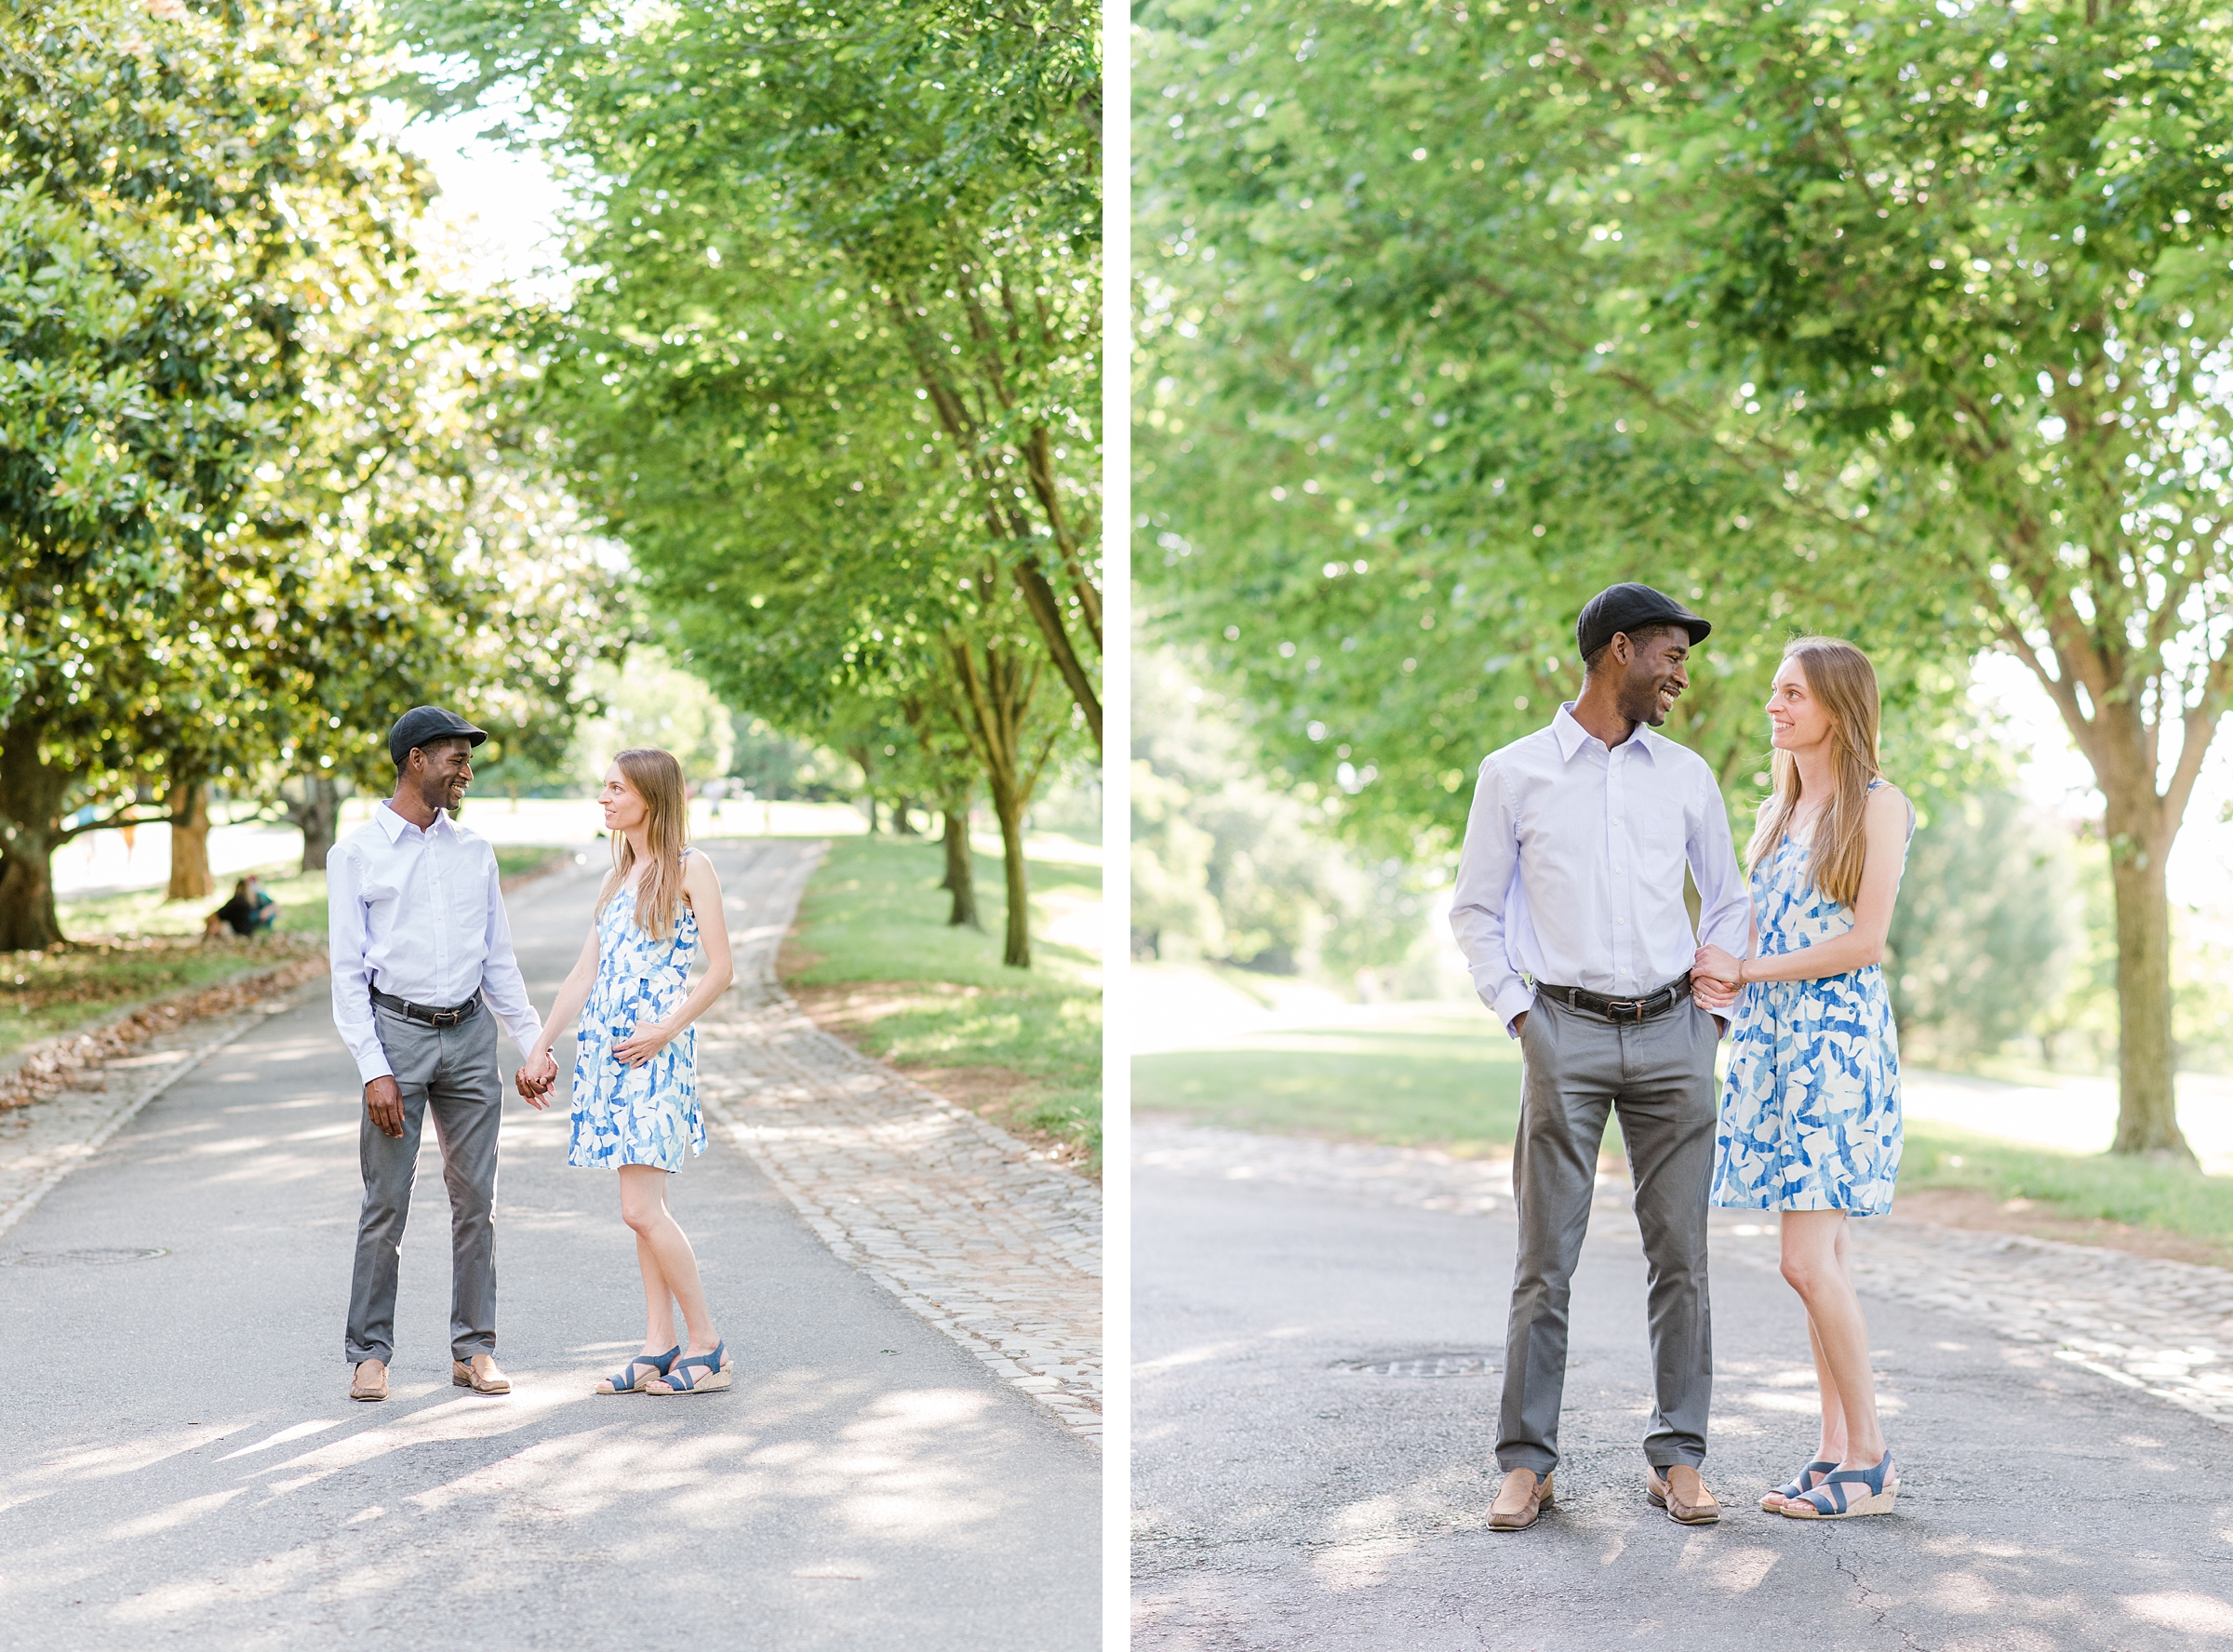 Spring Maymont Engagement Session | Kailey Brianne Photography